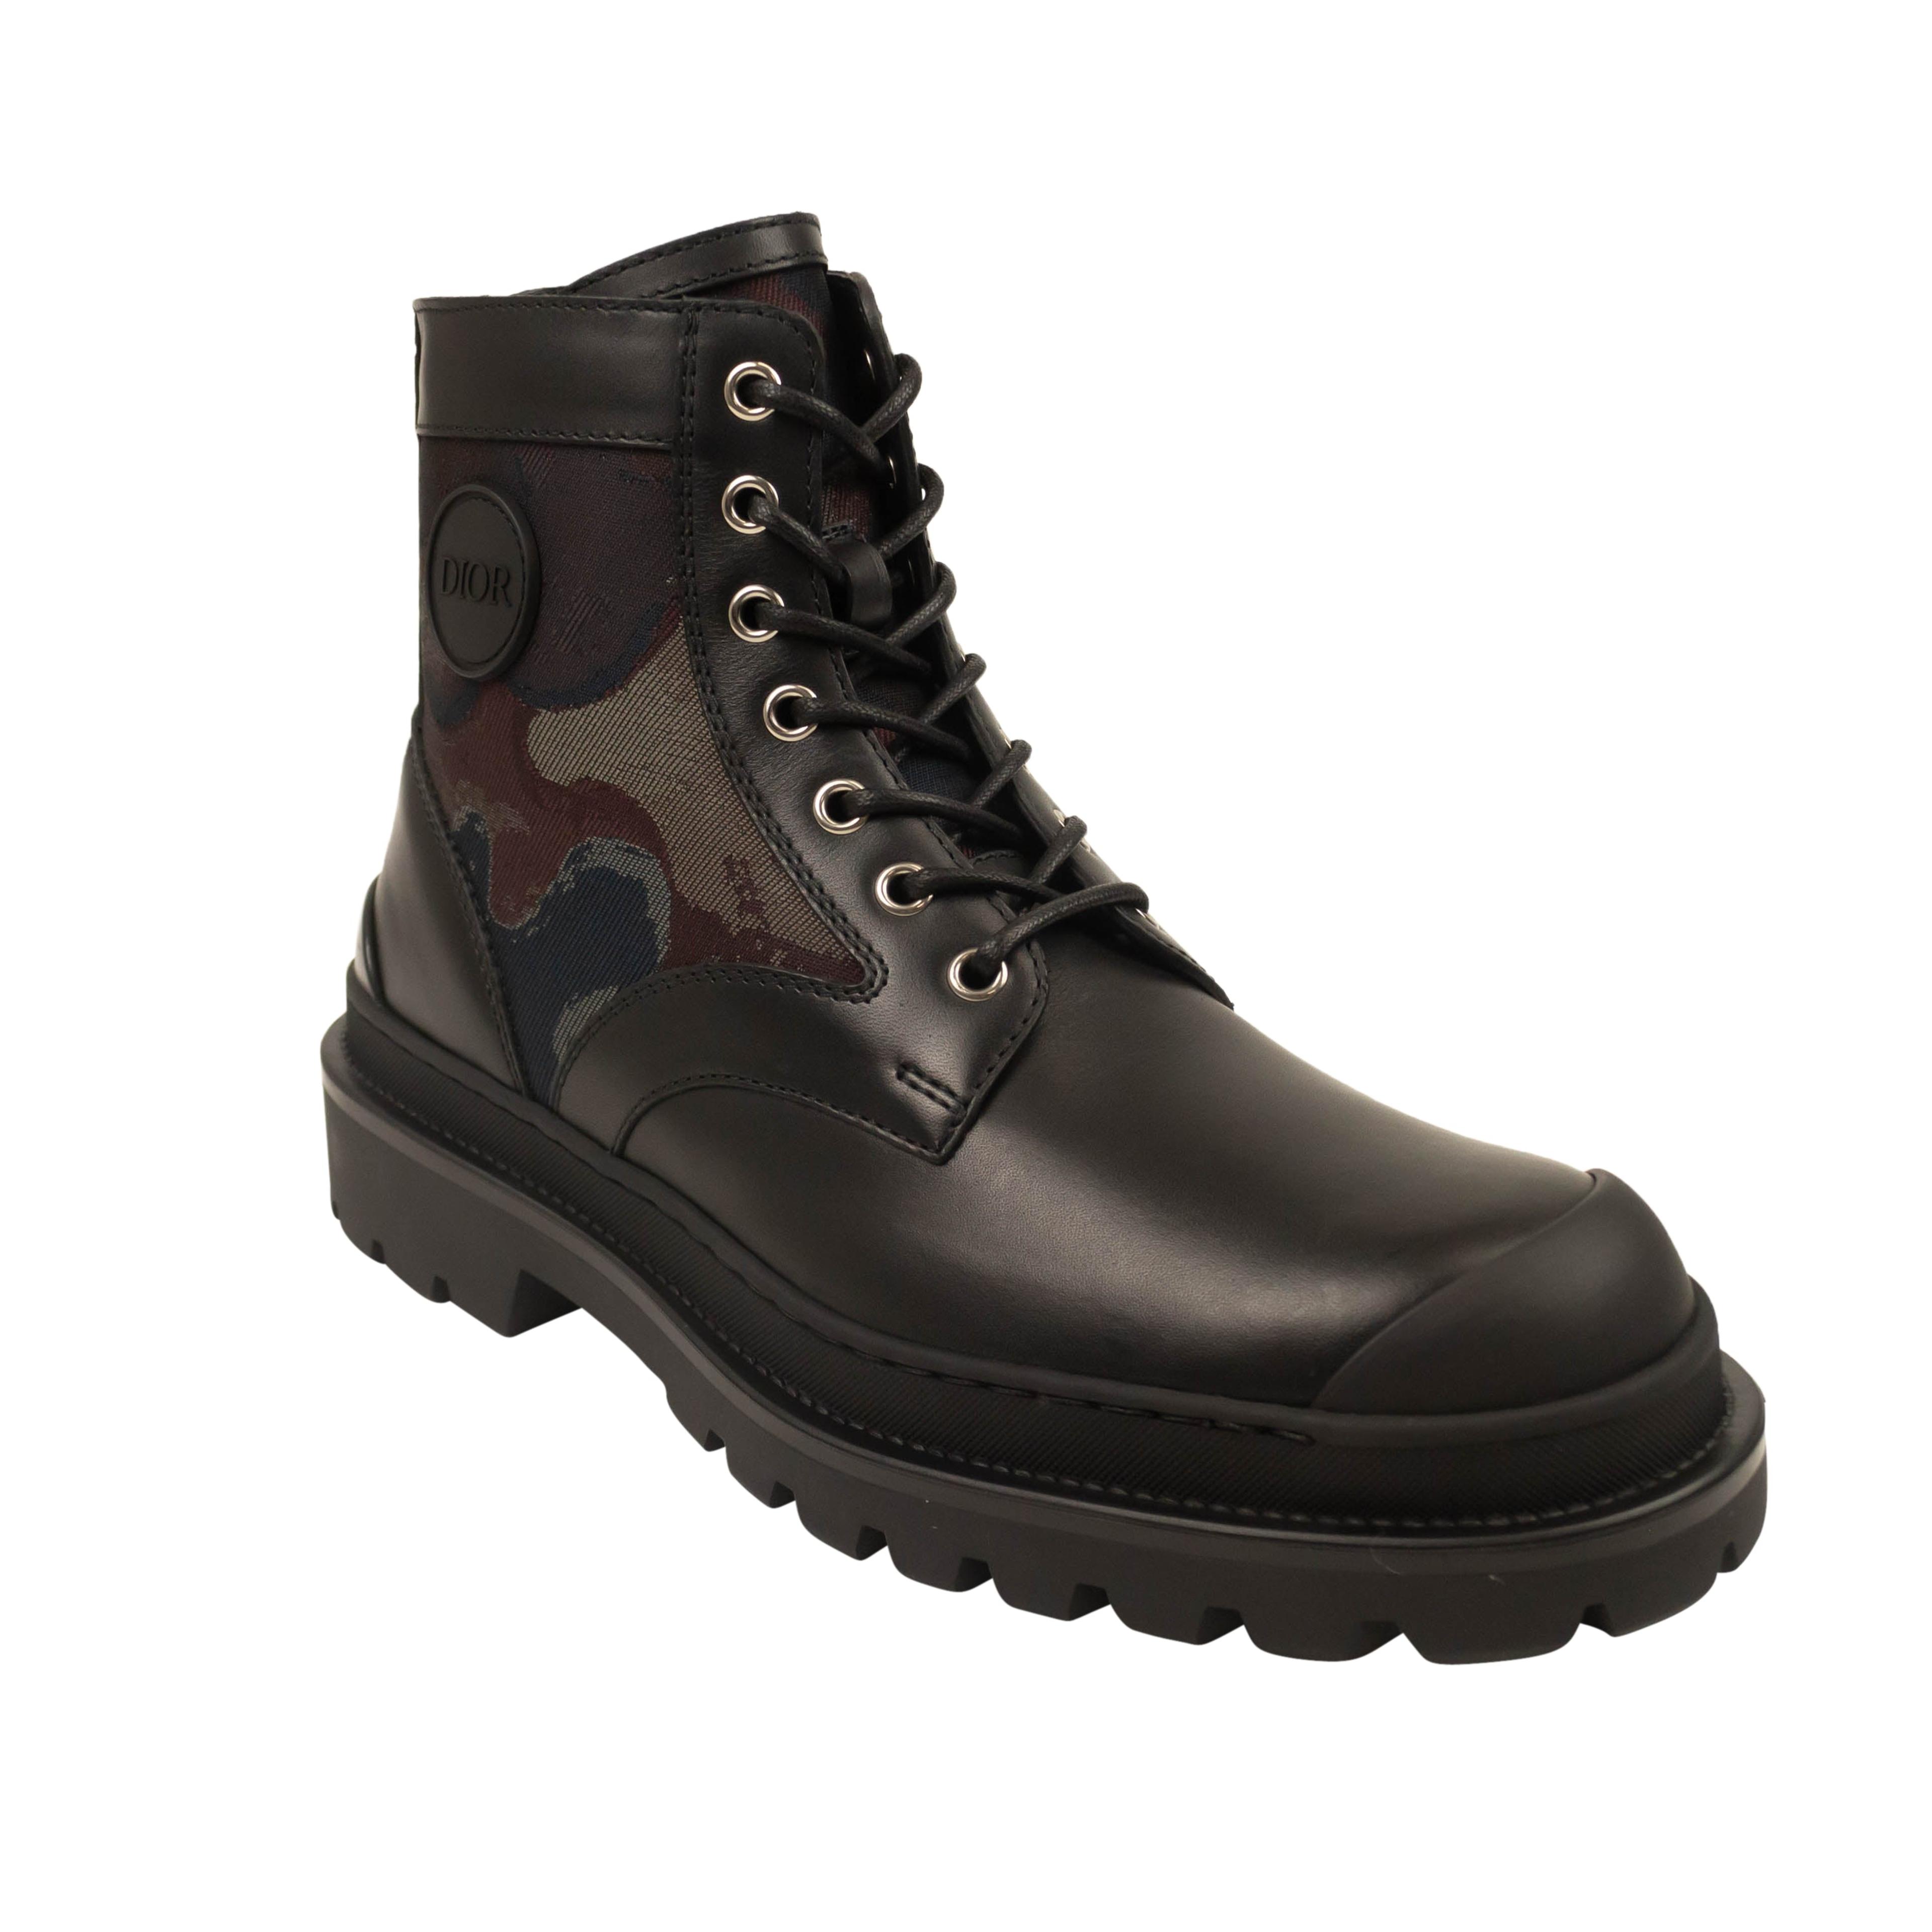 Alternate View 1 of X Peter Doig Black Leather Explorer Boots